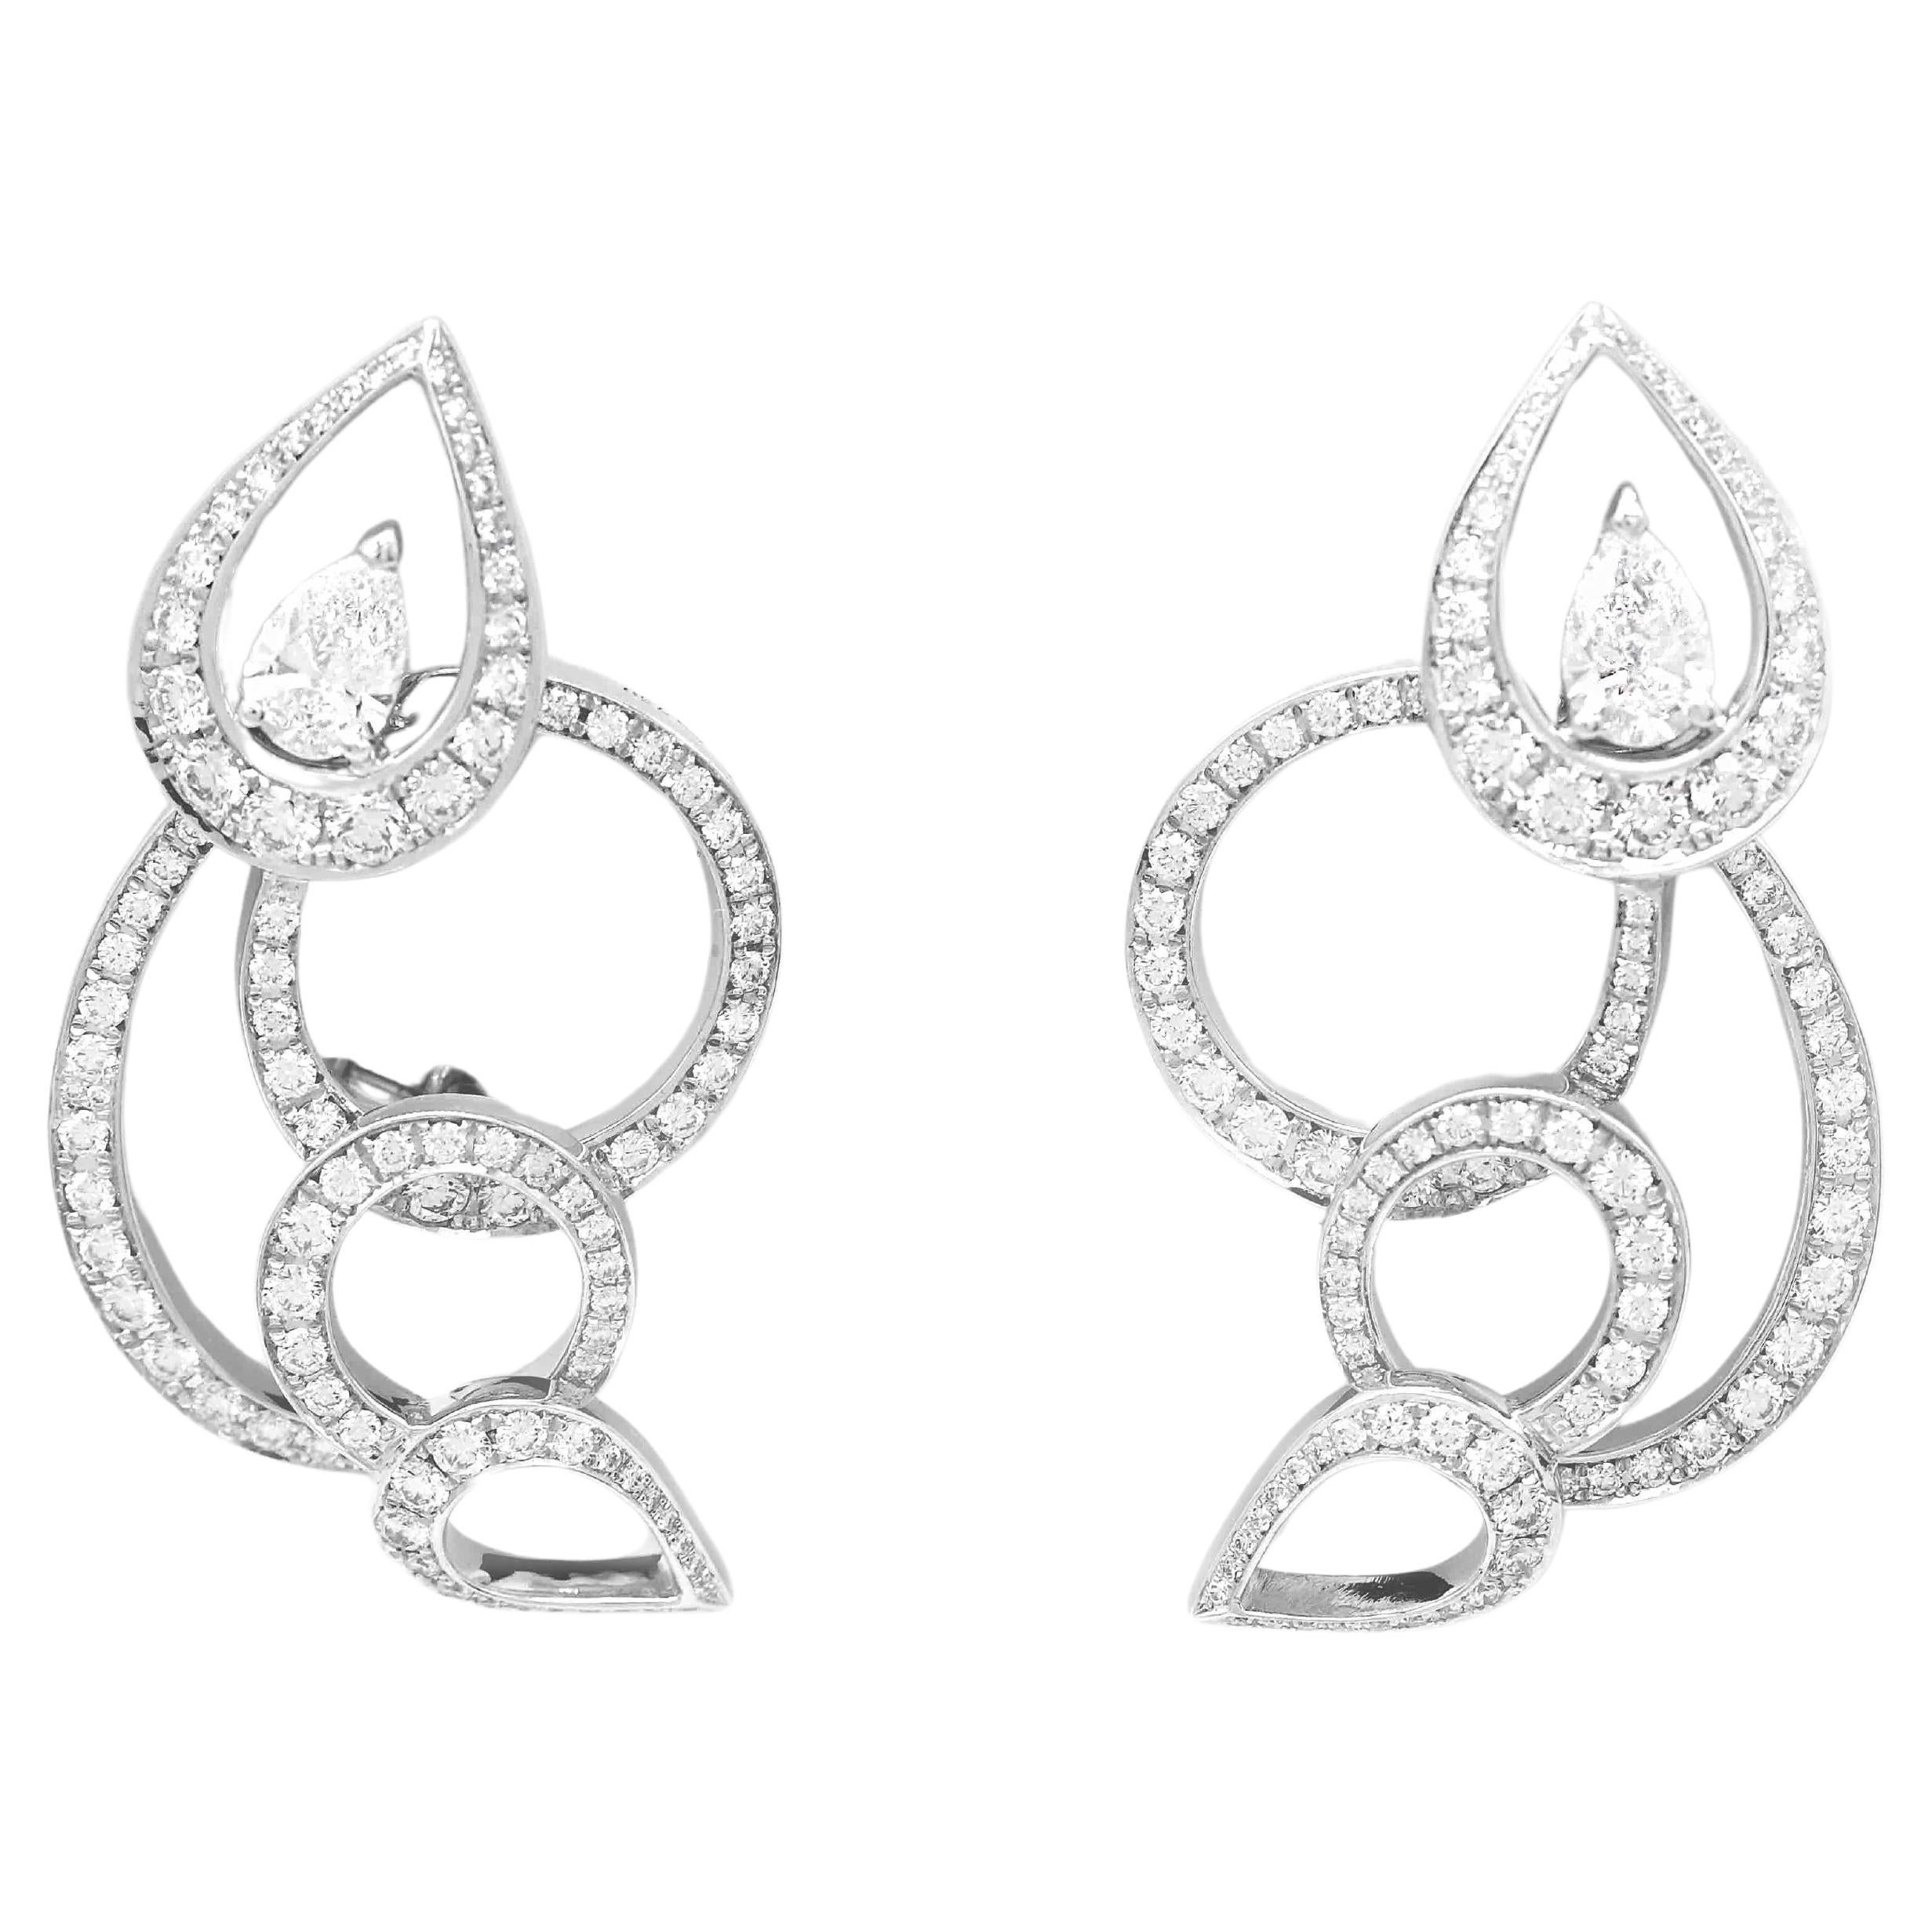 High jewelry earrings, Vincent Michel For Sale